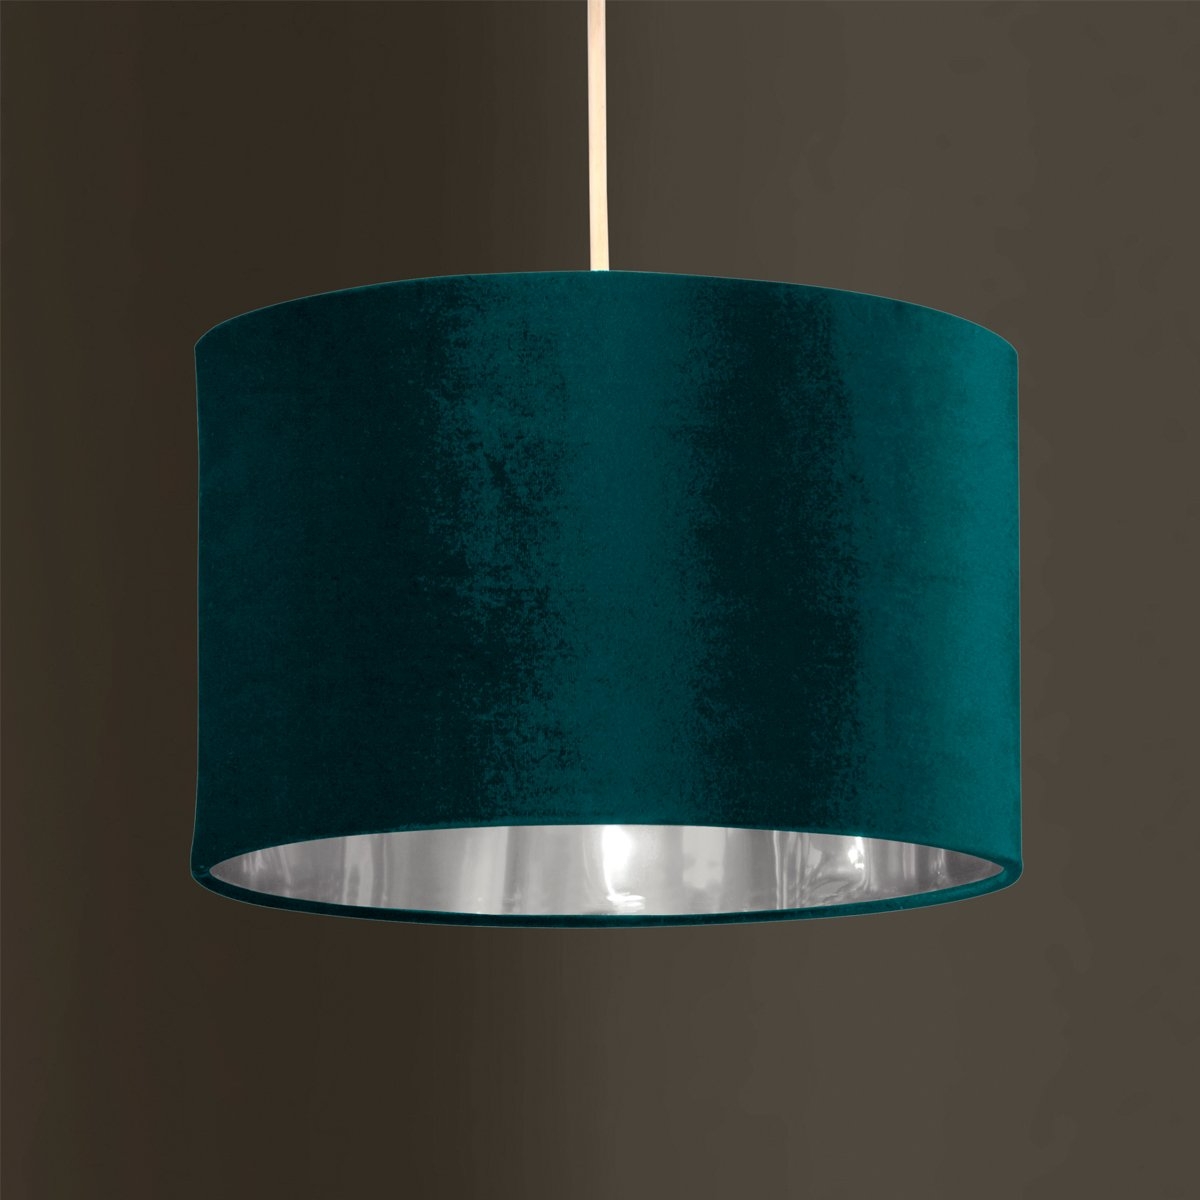 Luxury Pendant Shades – Choice Of Velvet Or Cotton Teal Velvet & Silver – Lamp Shade – CGC Retail Outlet